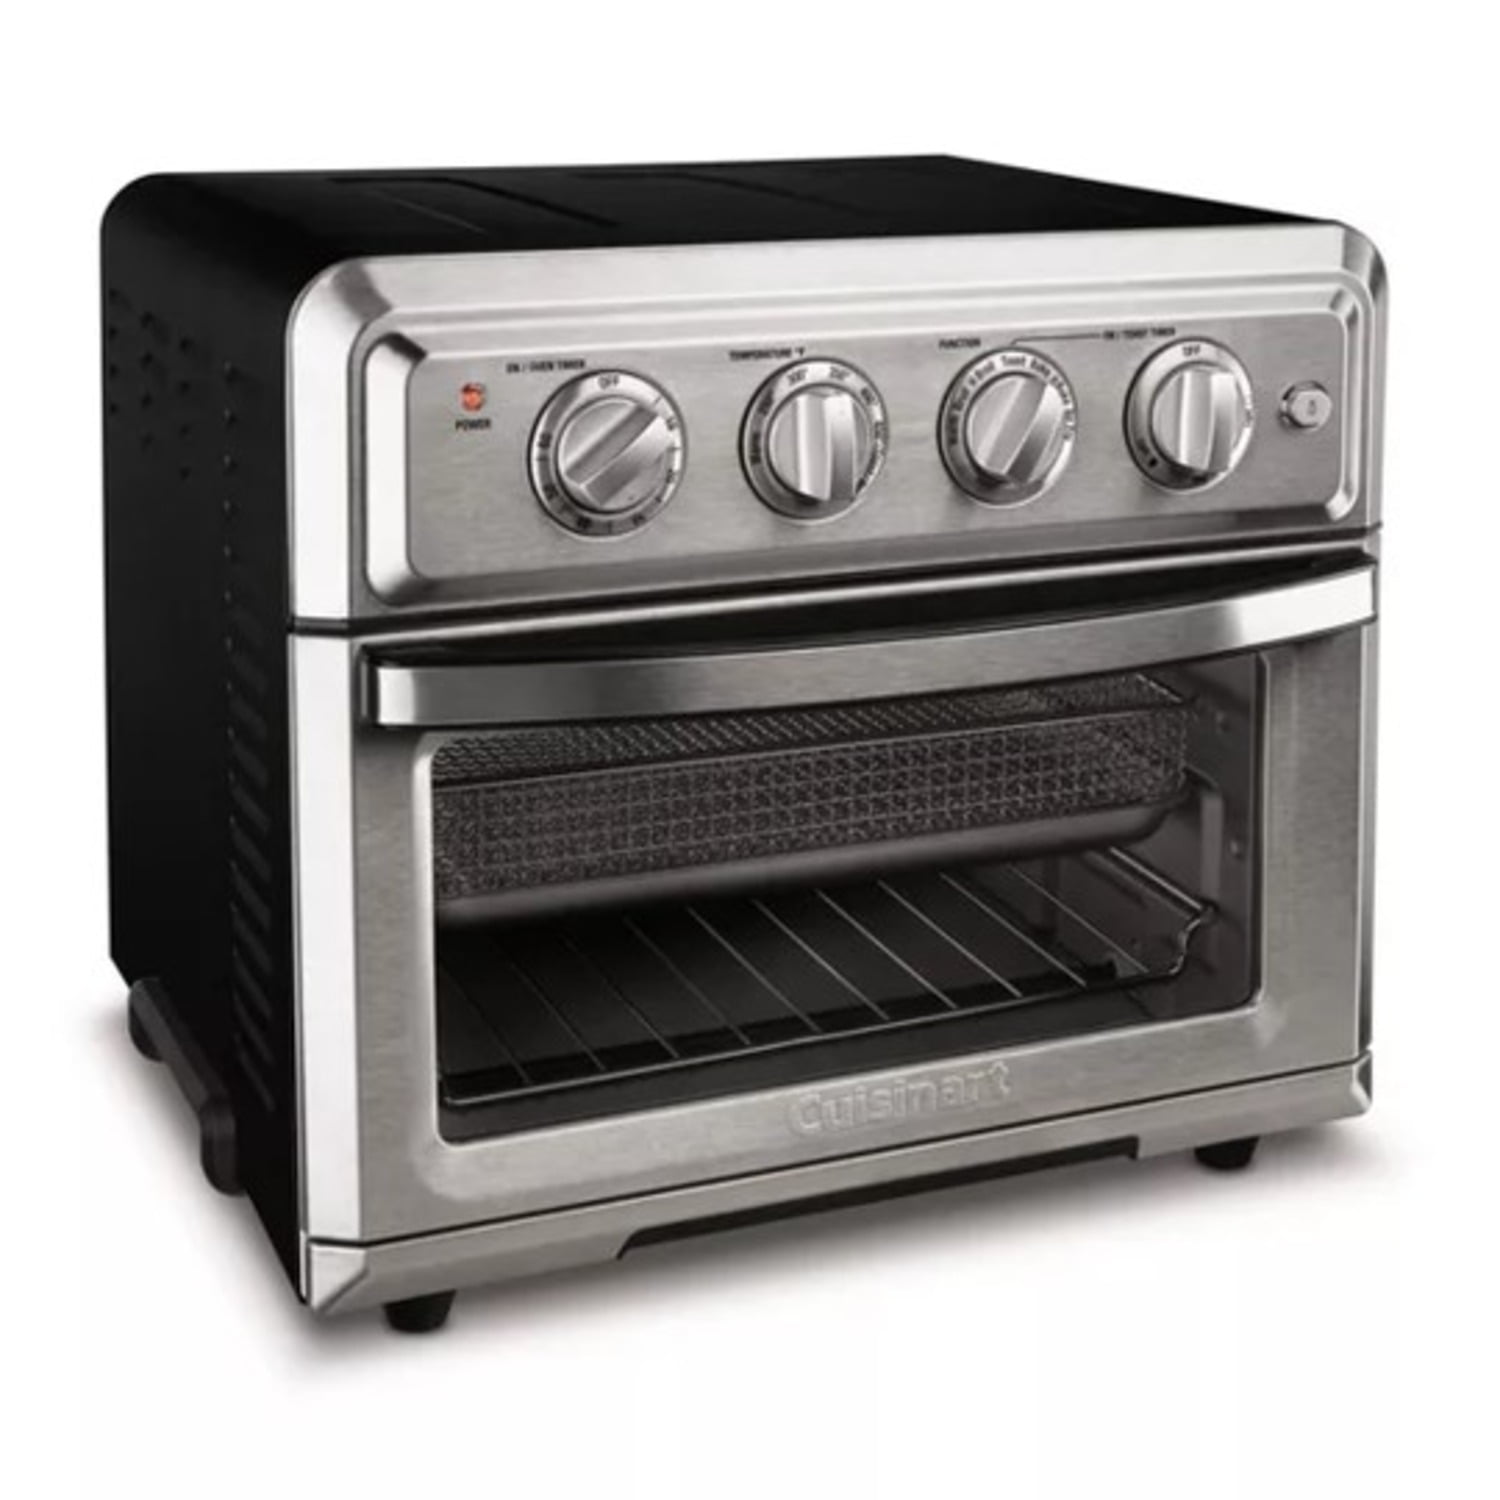  Air Fryer + Convection Toaster Oven by Cuisinart, 7-1 Oven with  Bake, Grill, Broil & Warm Options, Stainless Steel, TOA-60: Home & Kitchen